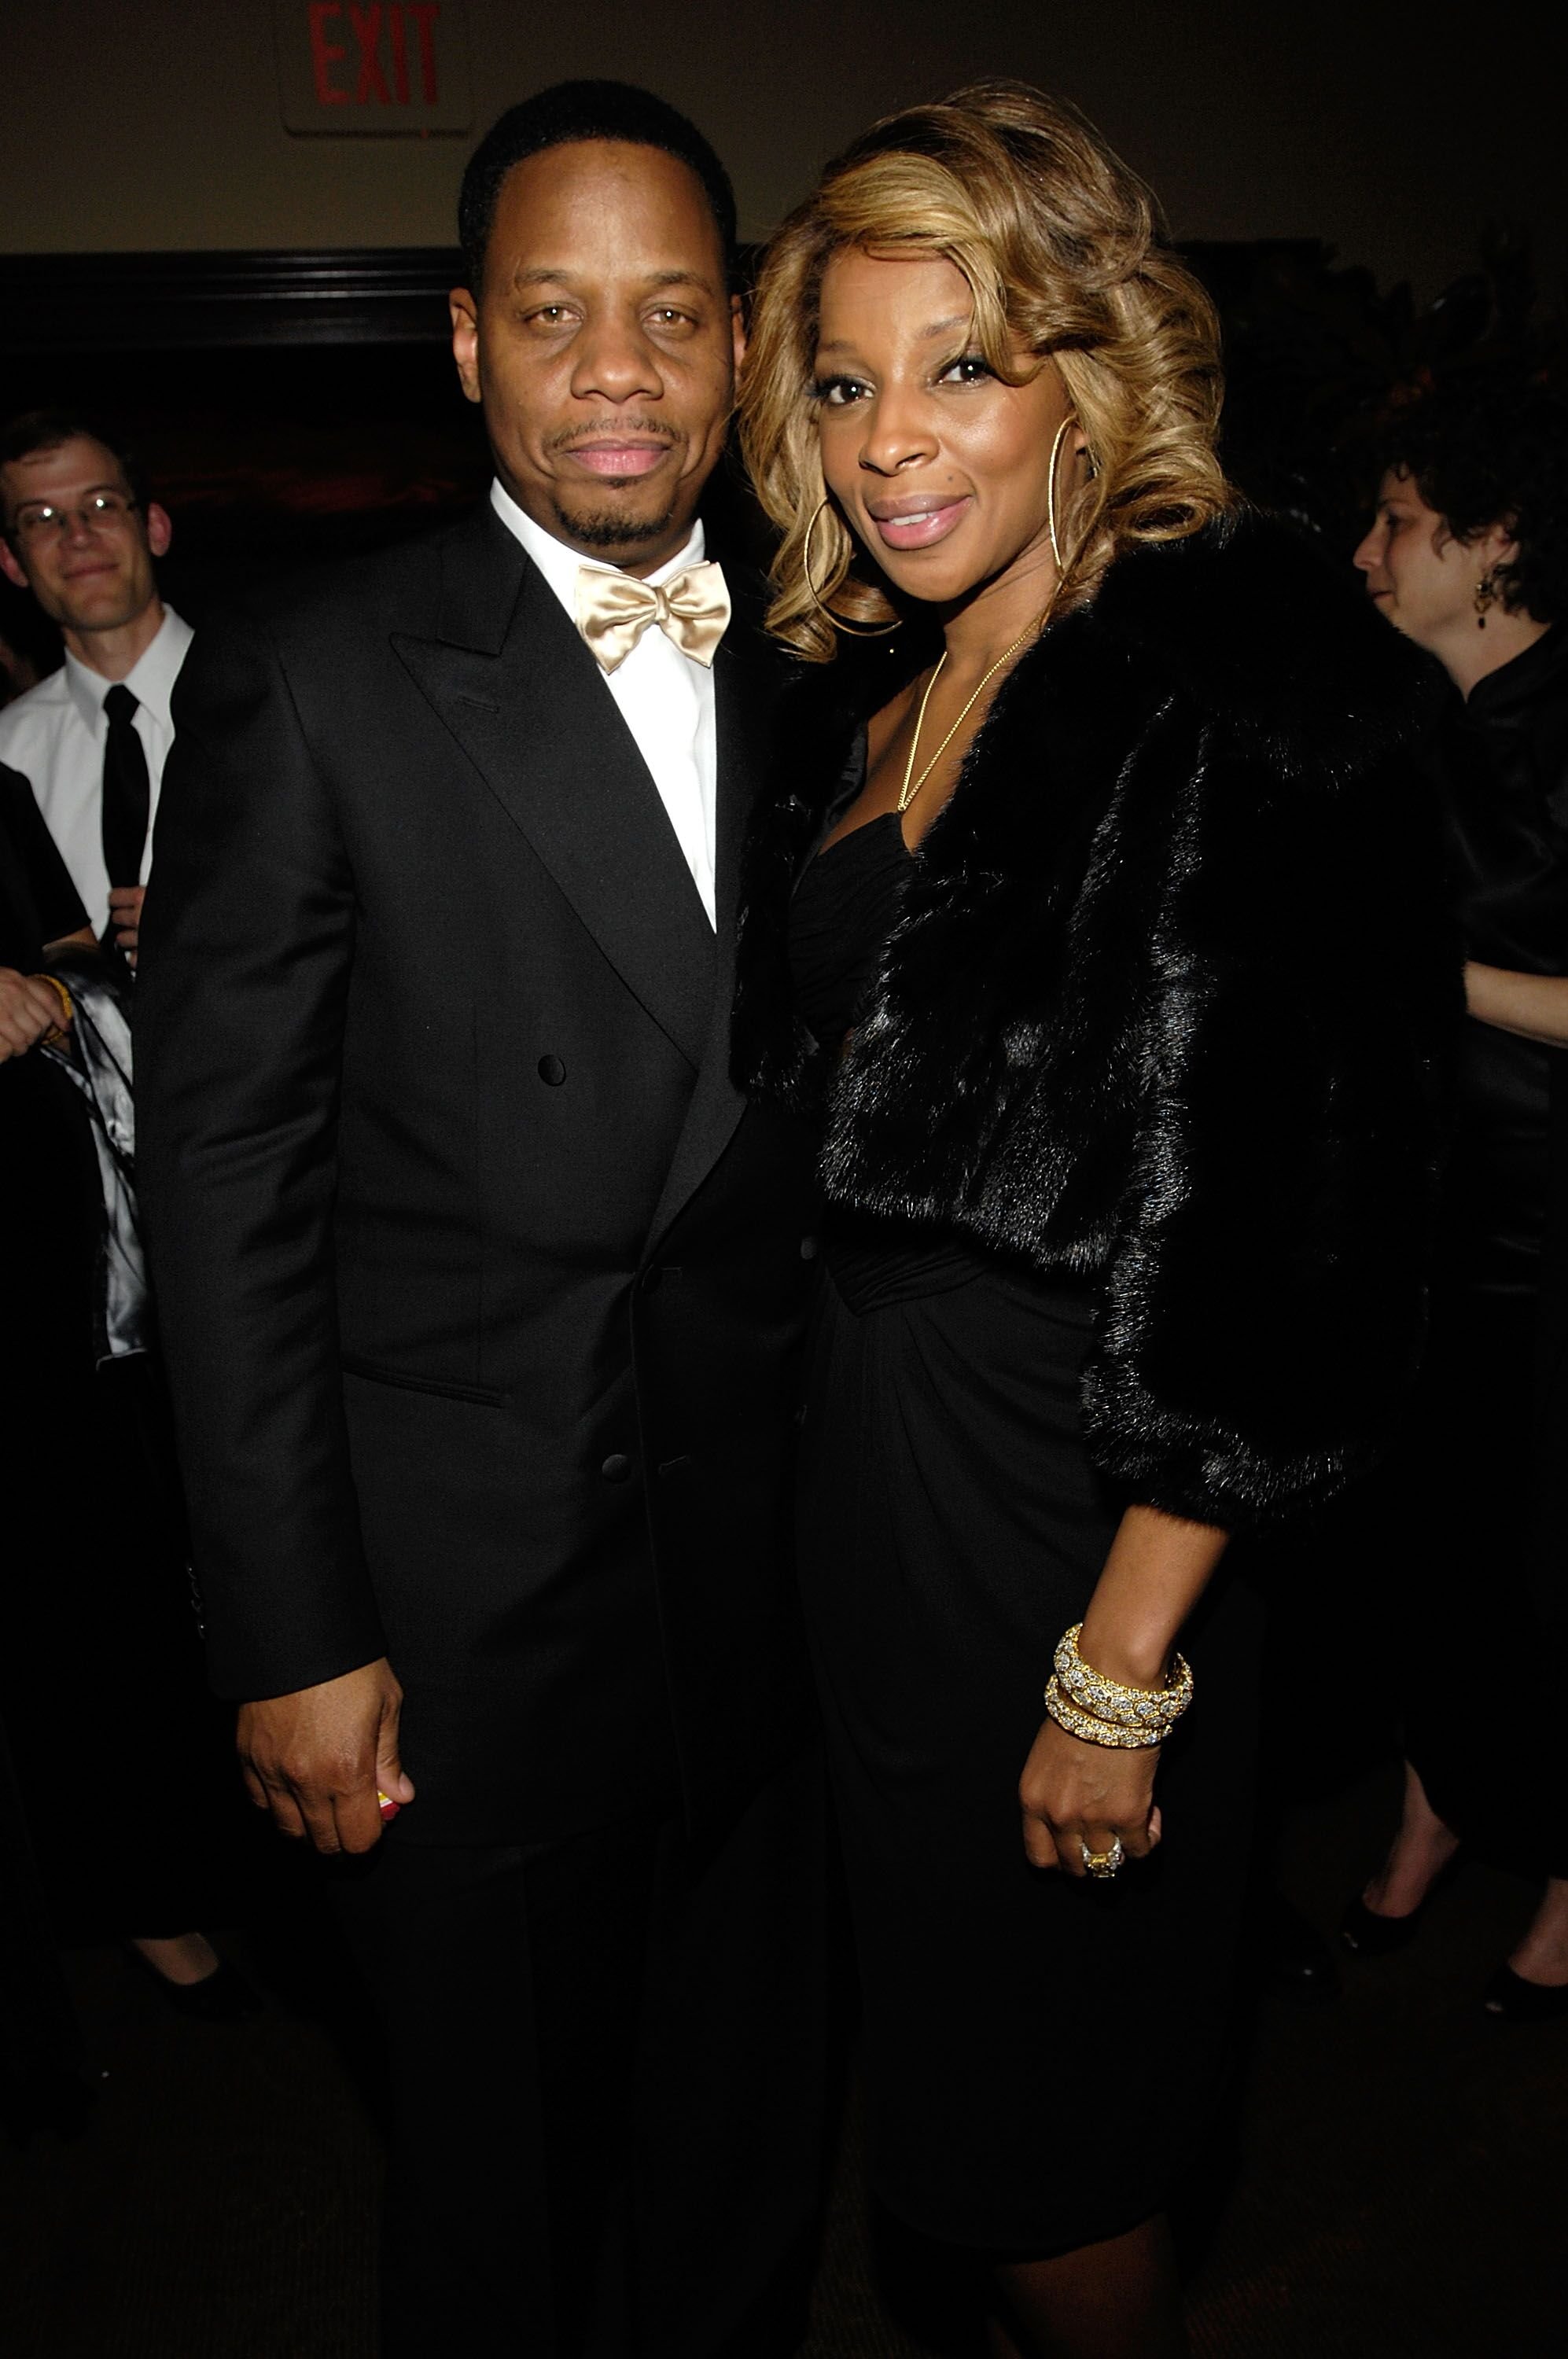 Mary J. Blige and ex-husband Kendu Isaacs/ Source: Getty Images